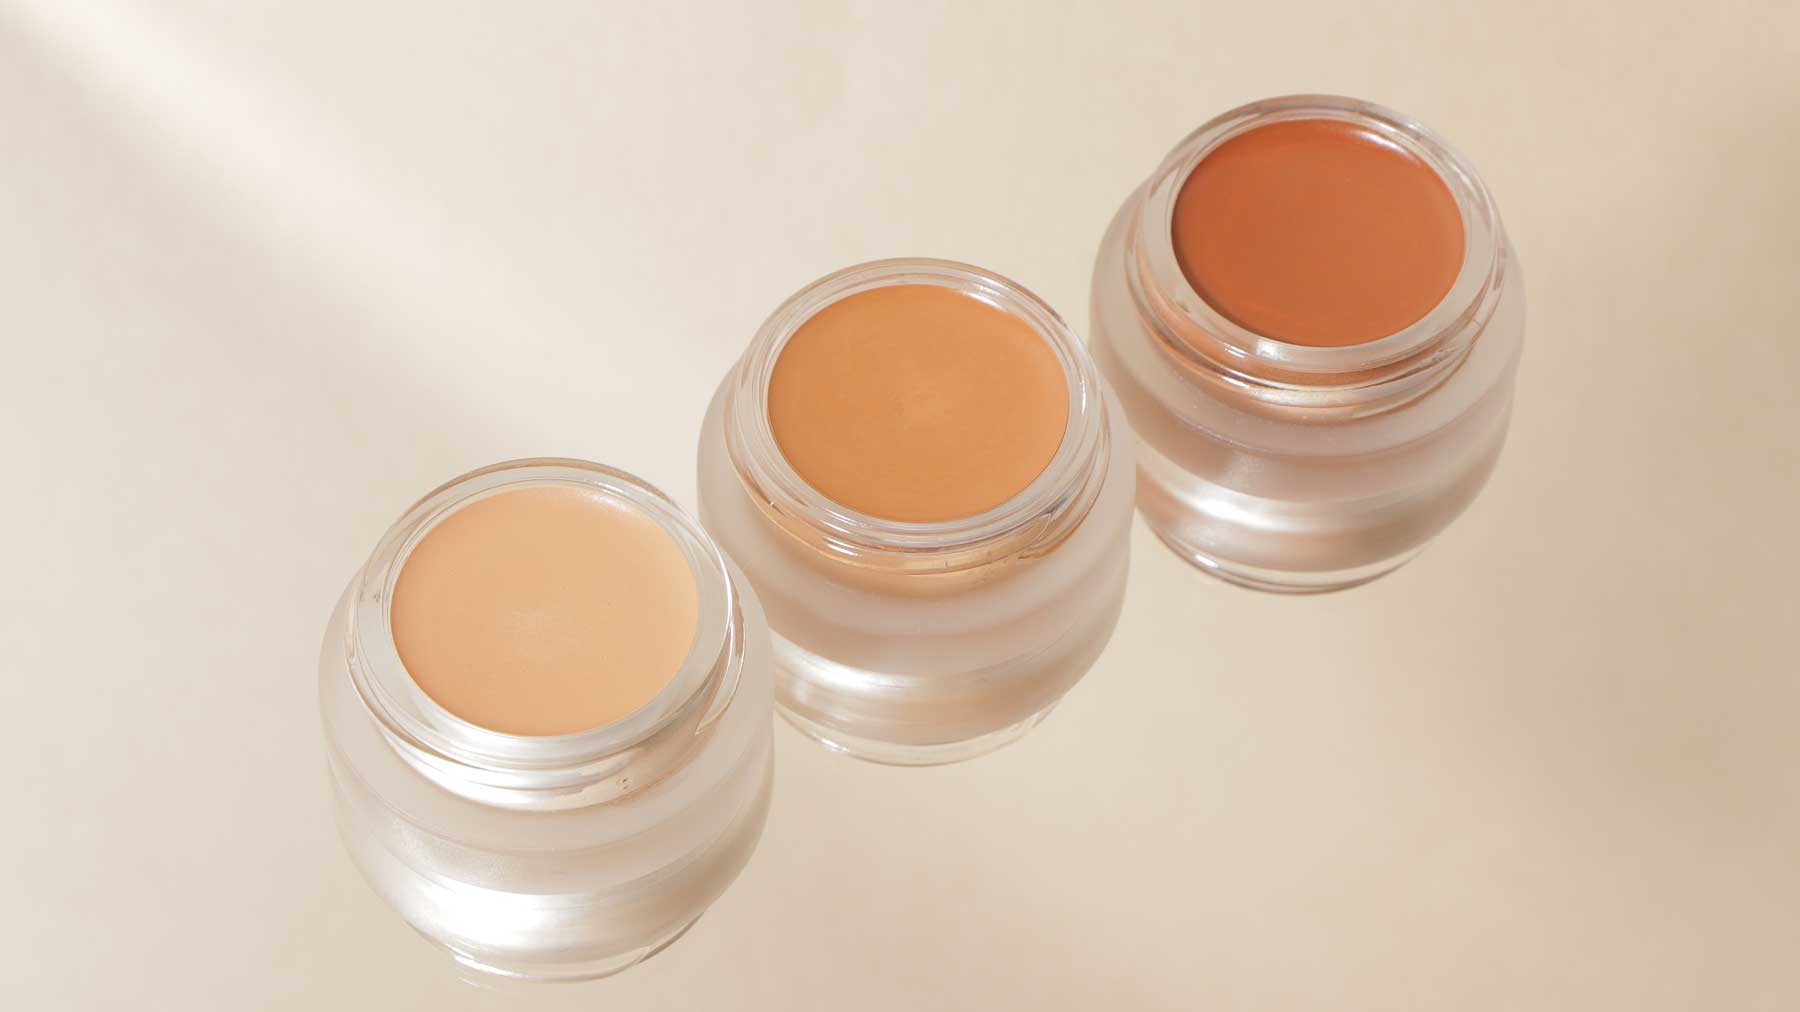 What's Your Finish? 4 Ways to Maximise Concealer/Foundation